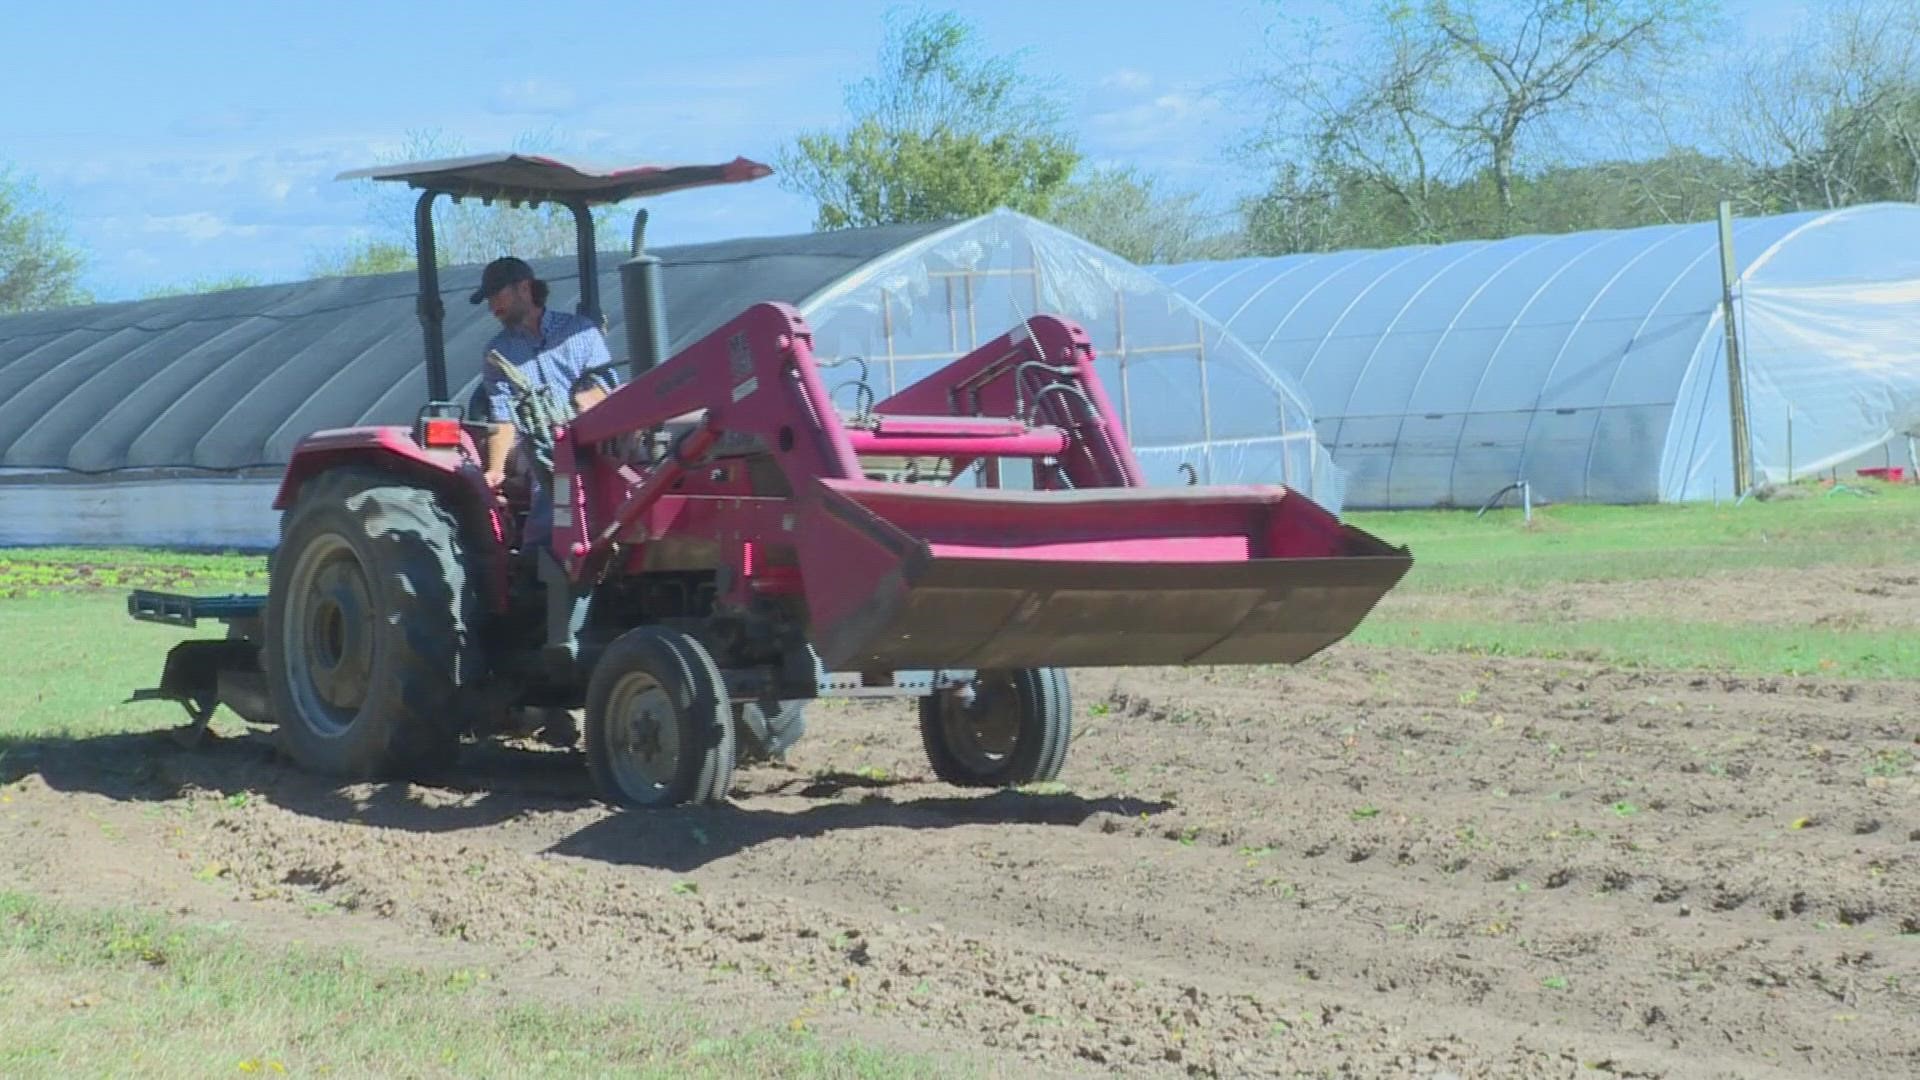 From the Dallas area to Winnsboro, TX, this family-ran farm has grown from a small garden to three acres in three years.